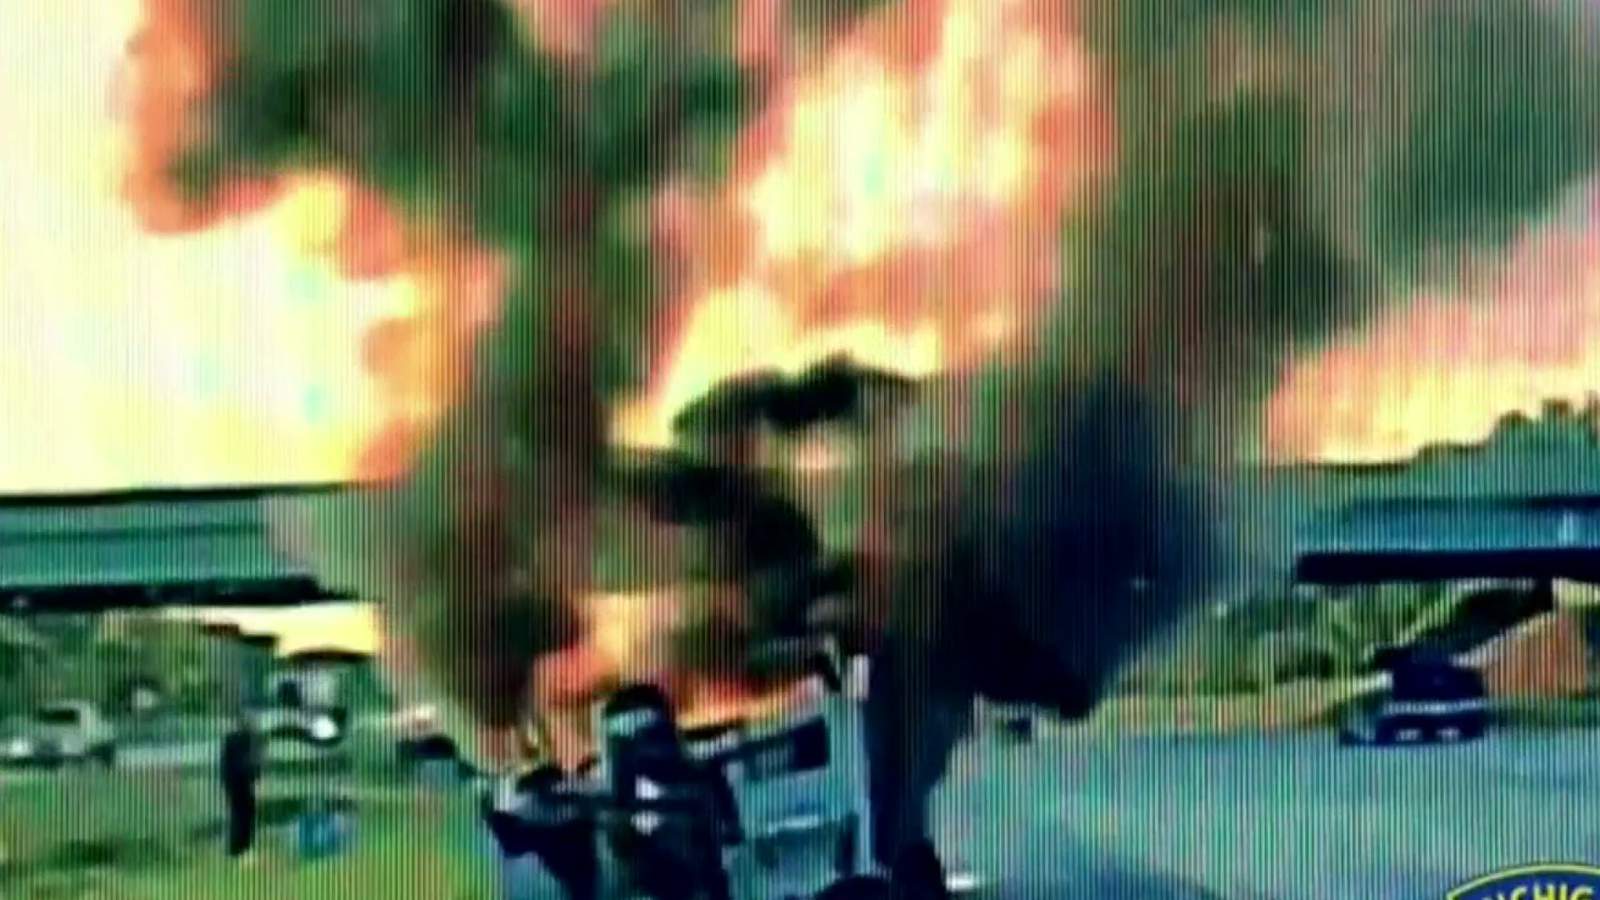 Michigan state trooper saves driver from burning truck on I-94 in Van Buren Township